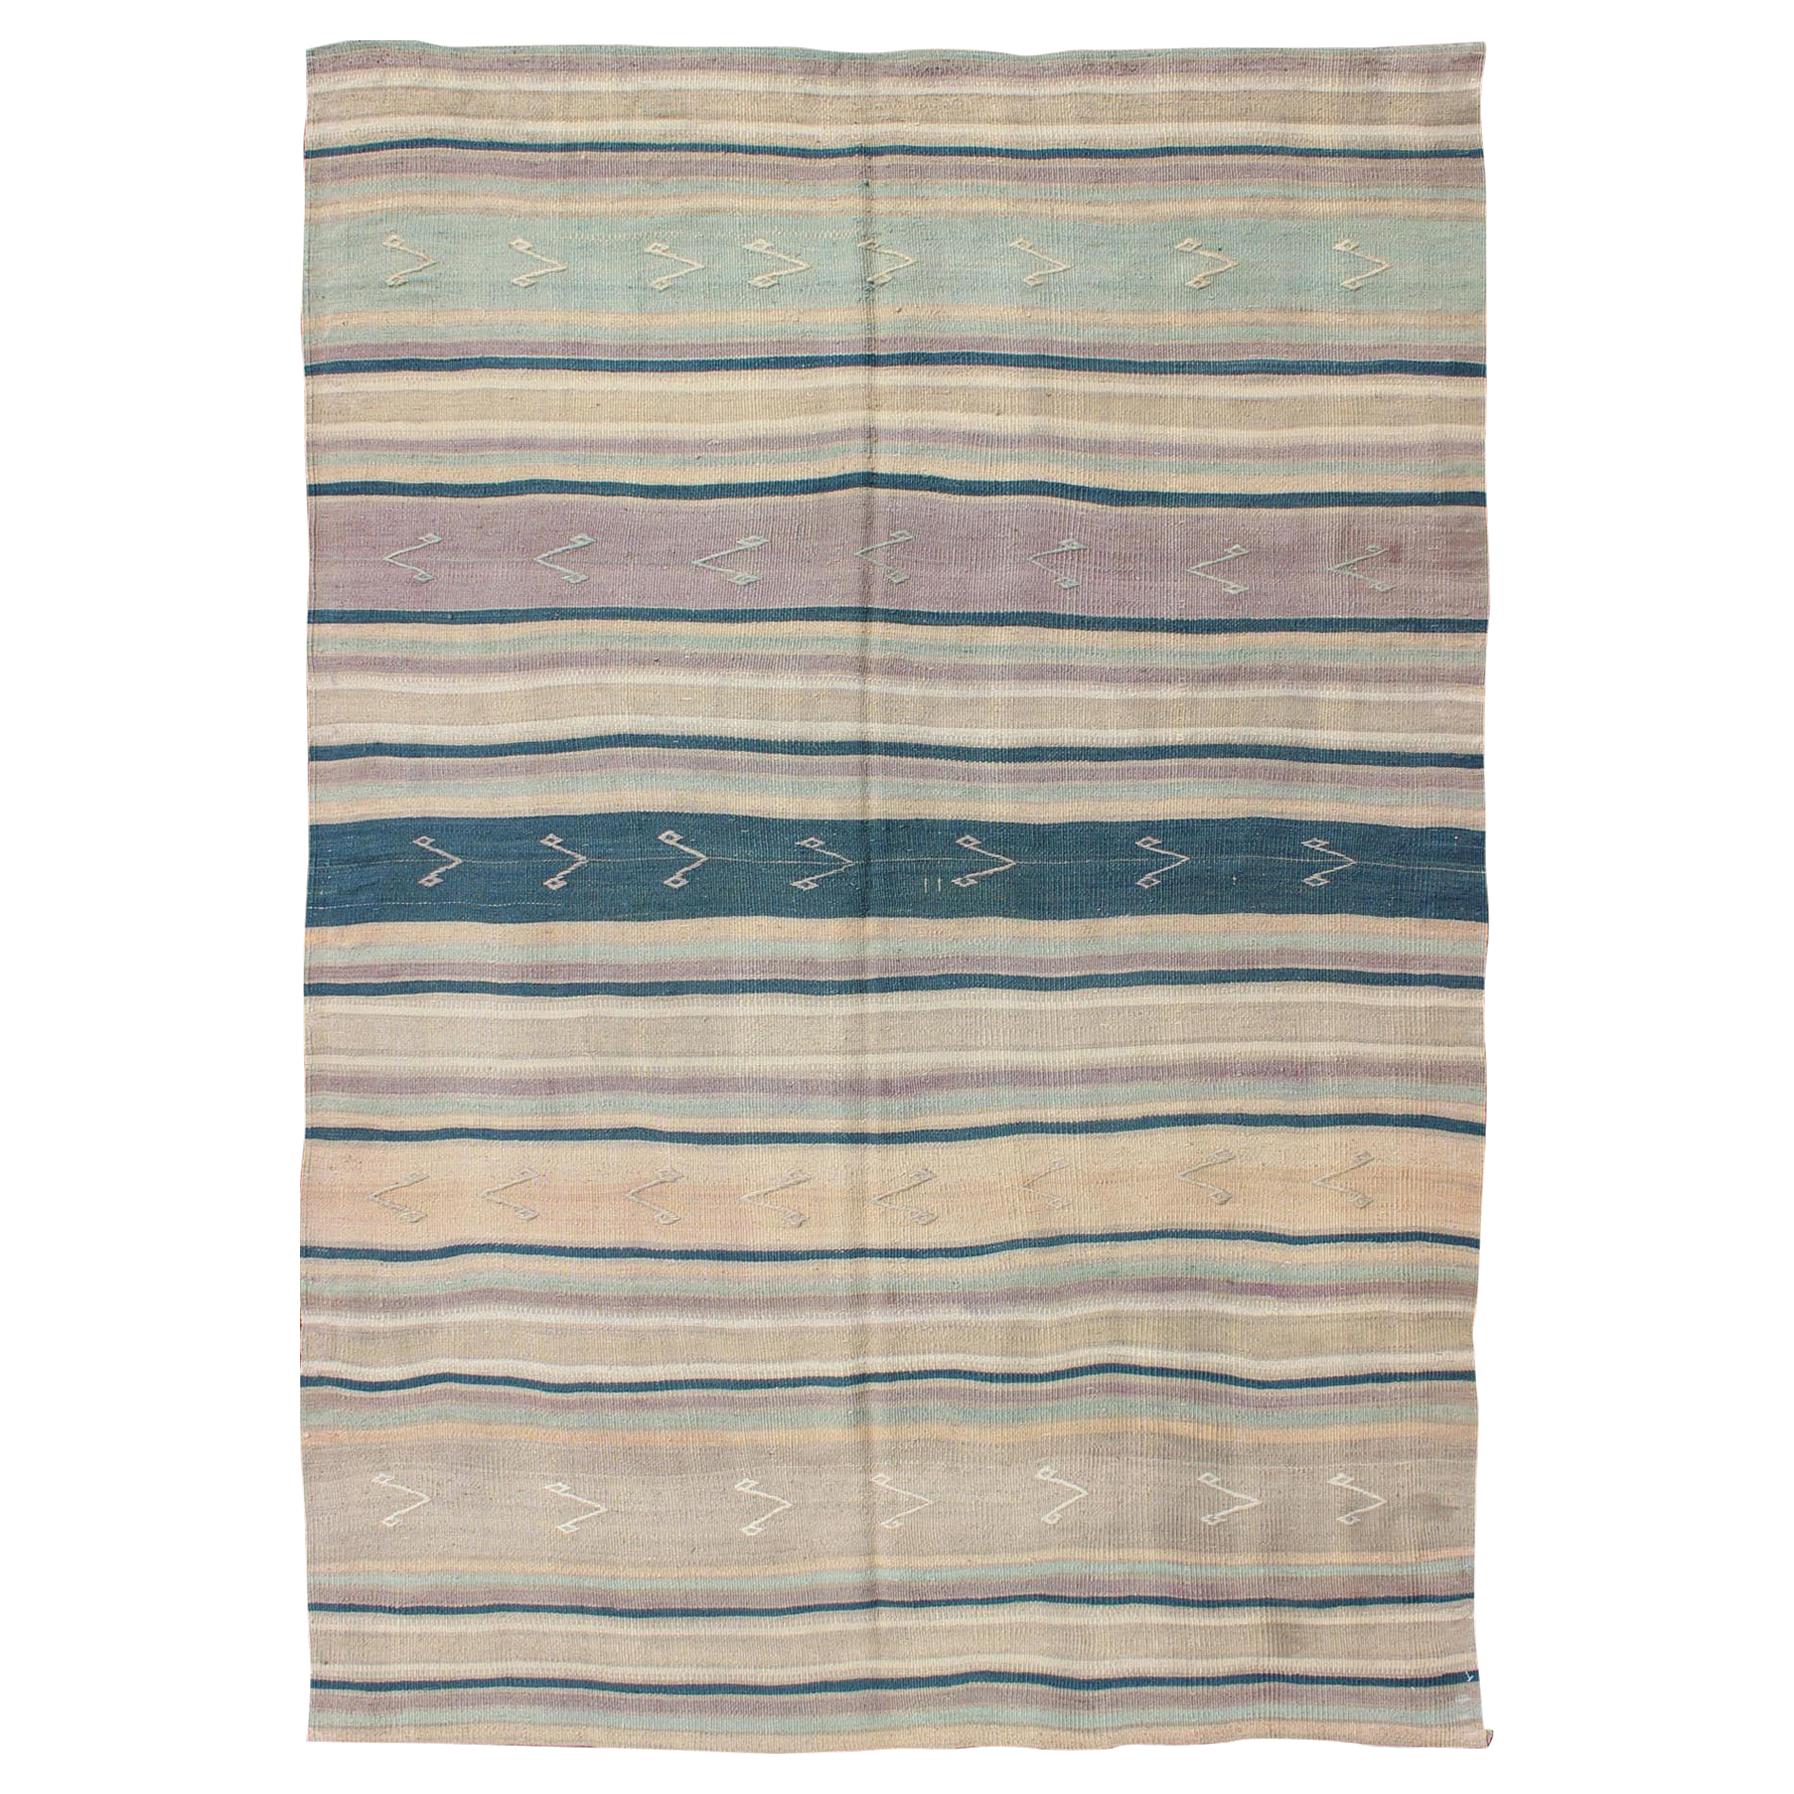 Turkish Vintage Flat-Weave Kilim with Striped Design and Tribal Motifs